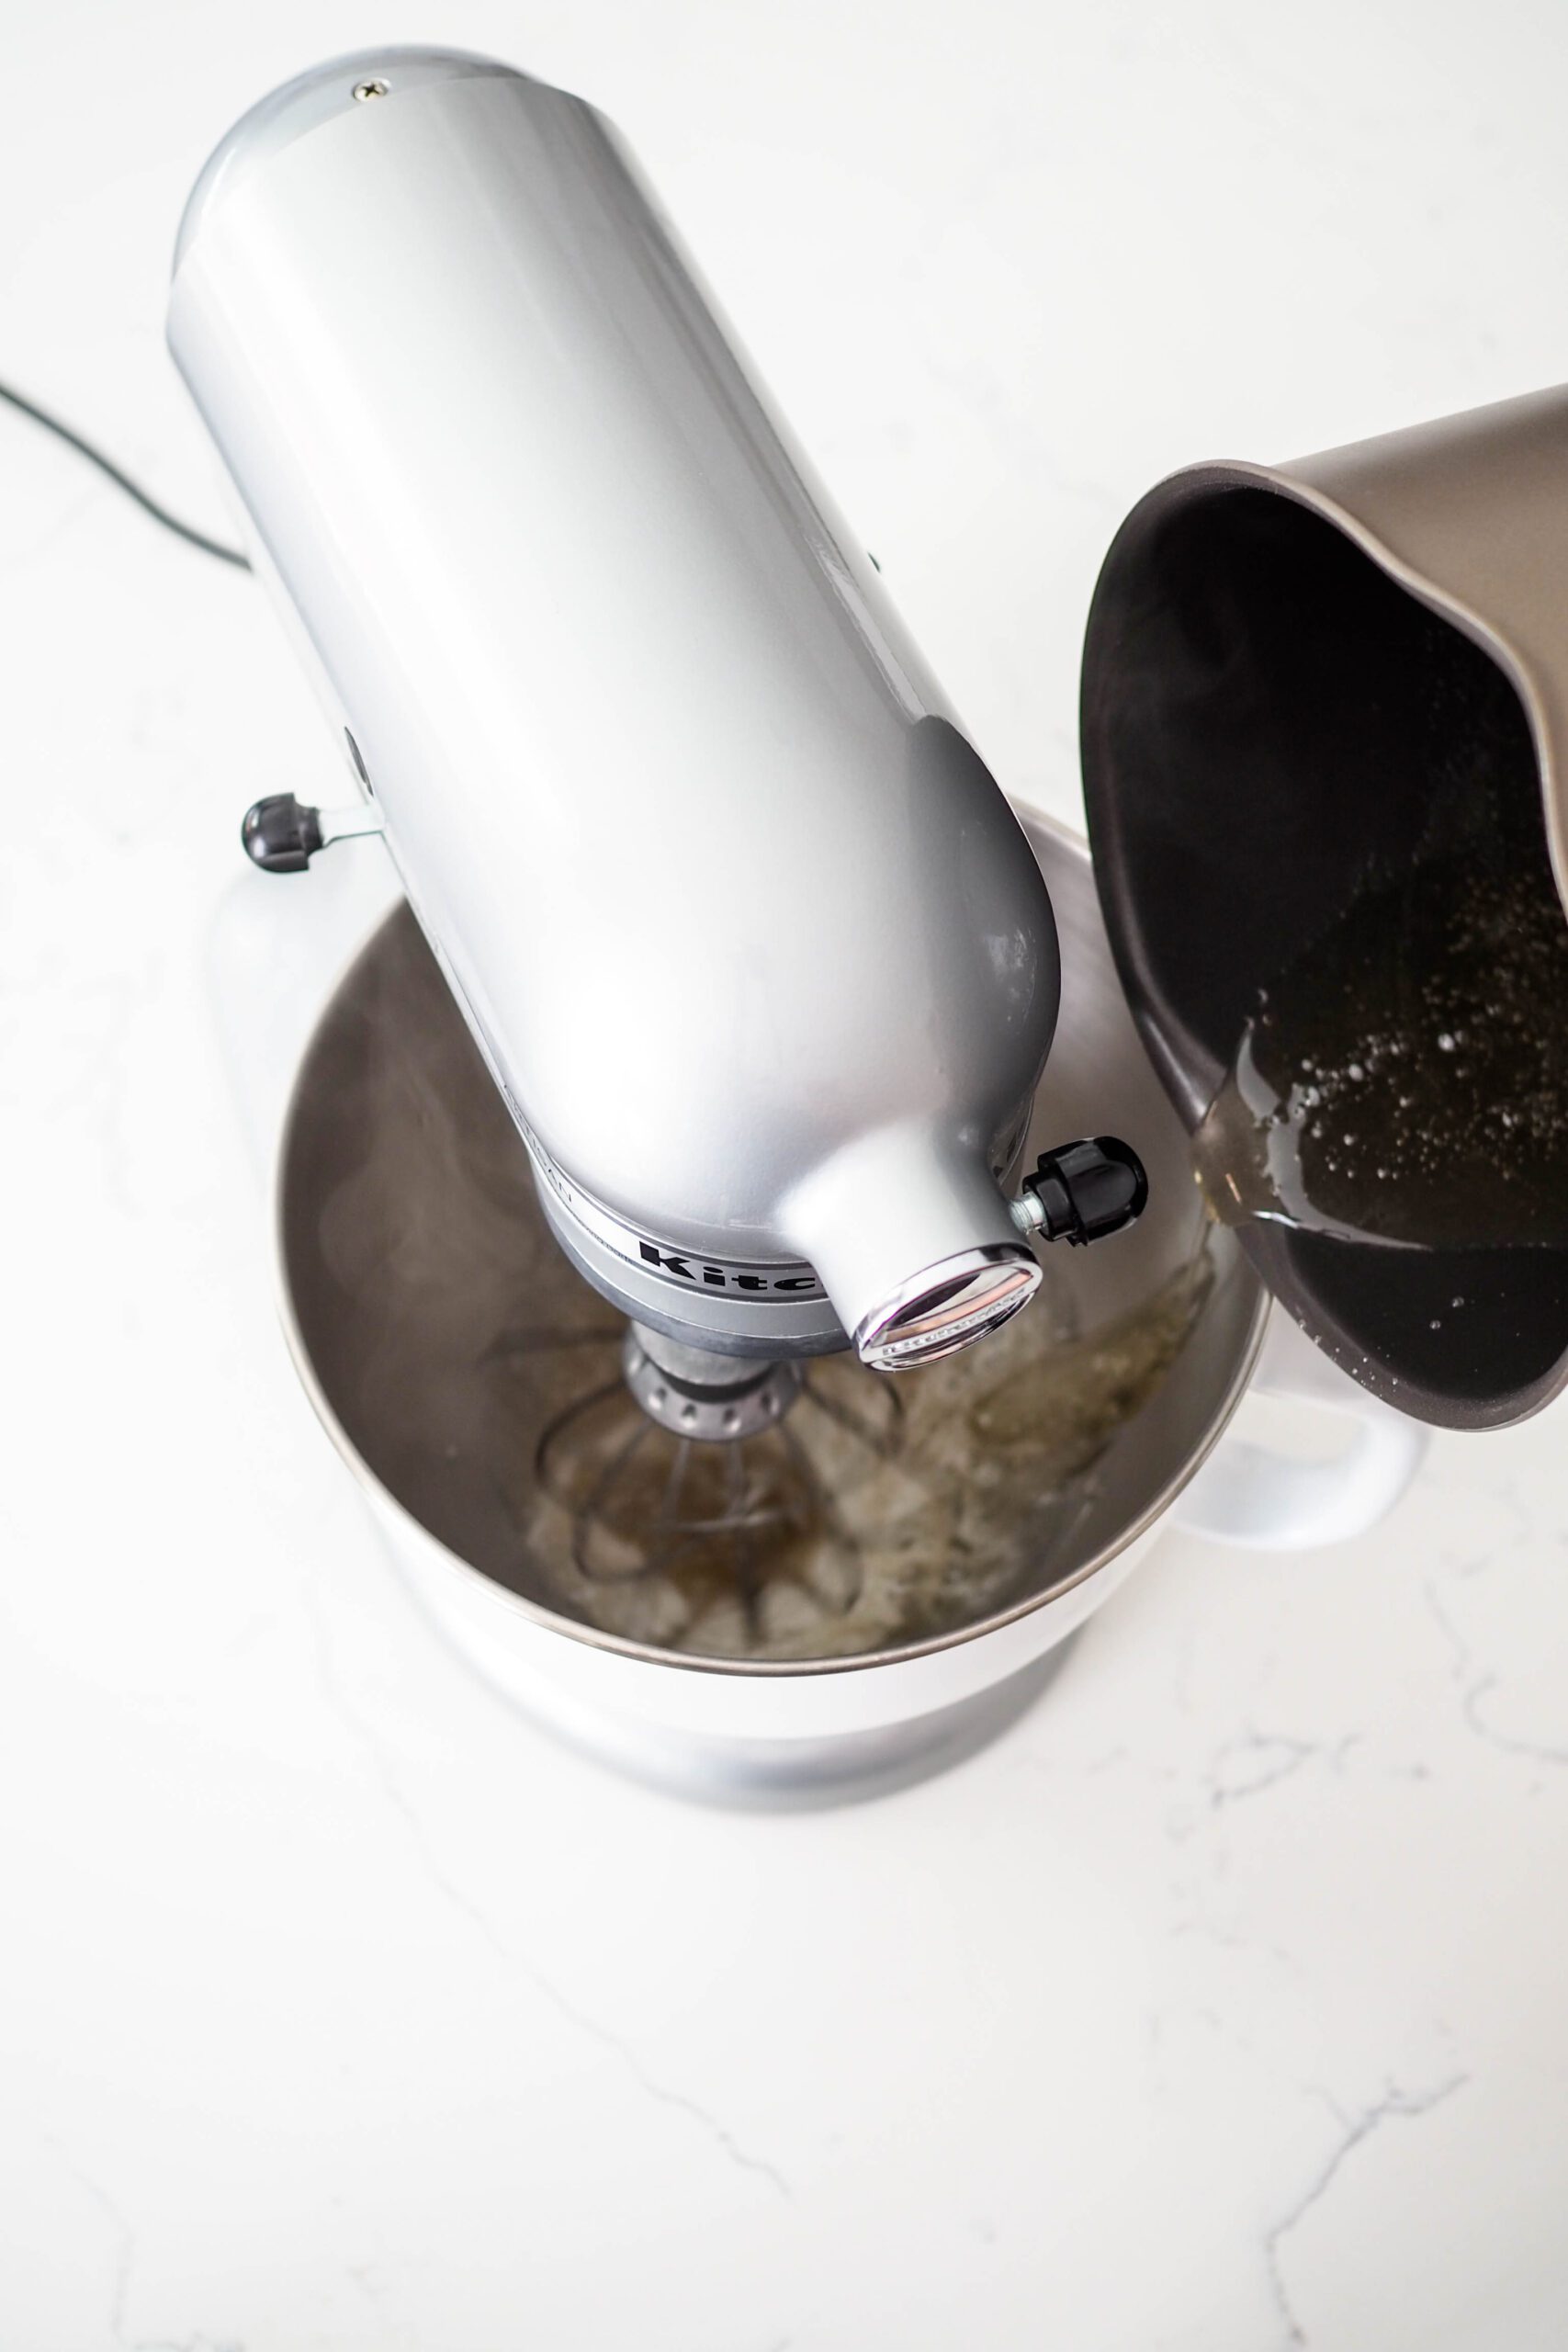 Sugar syrup carefully poured into a mixer bowl with the whisk going.